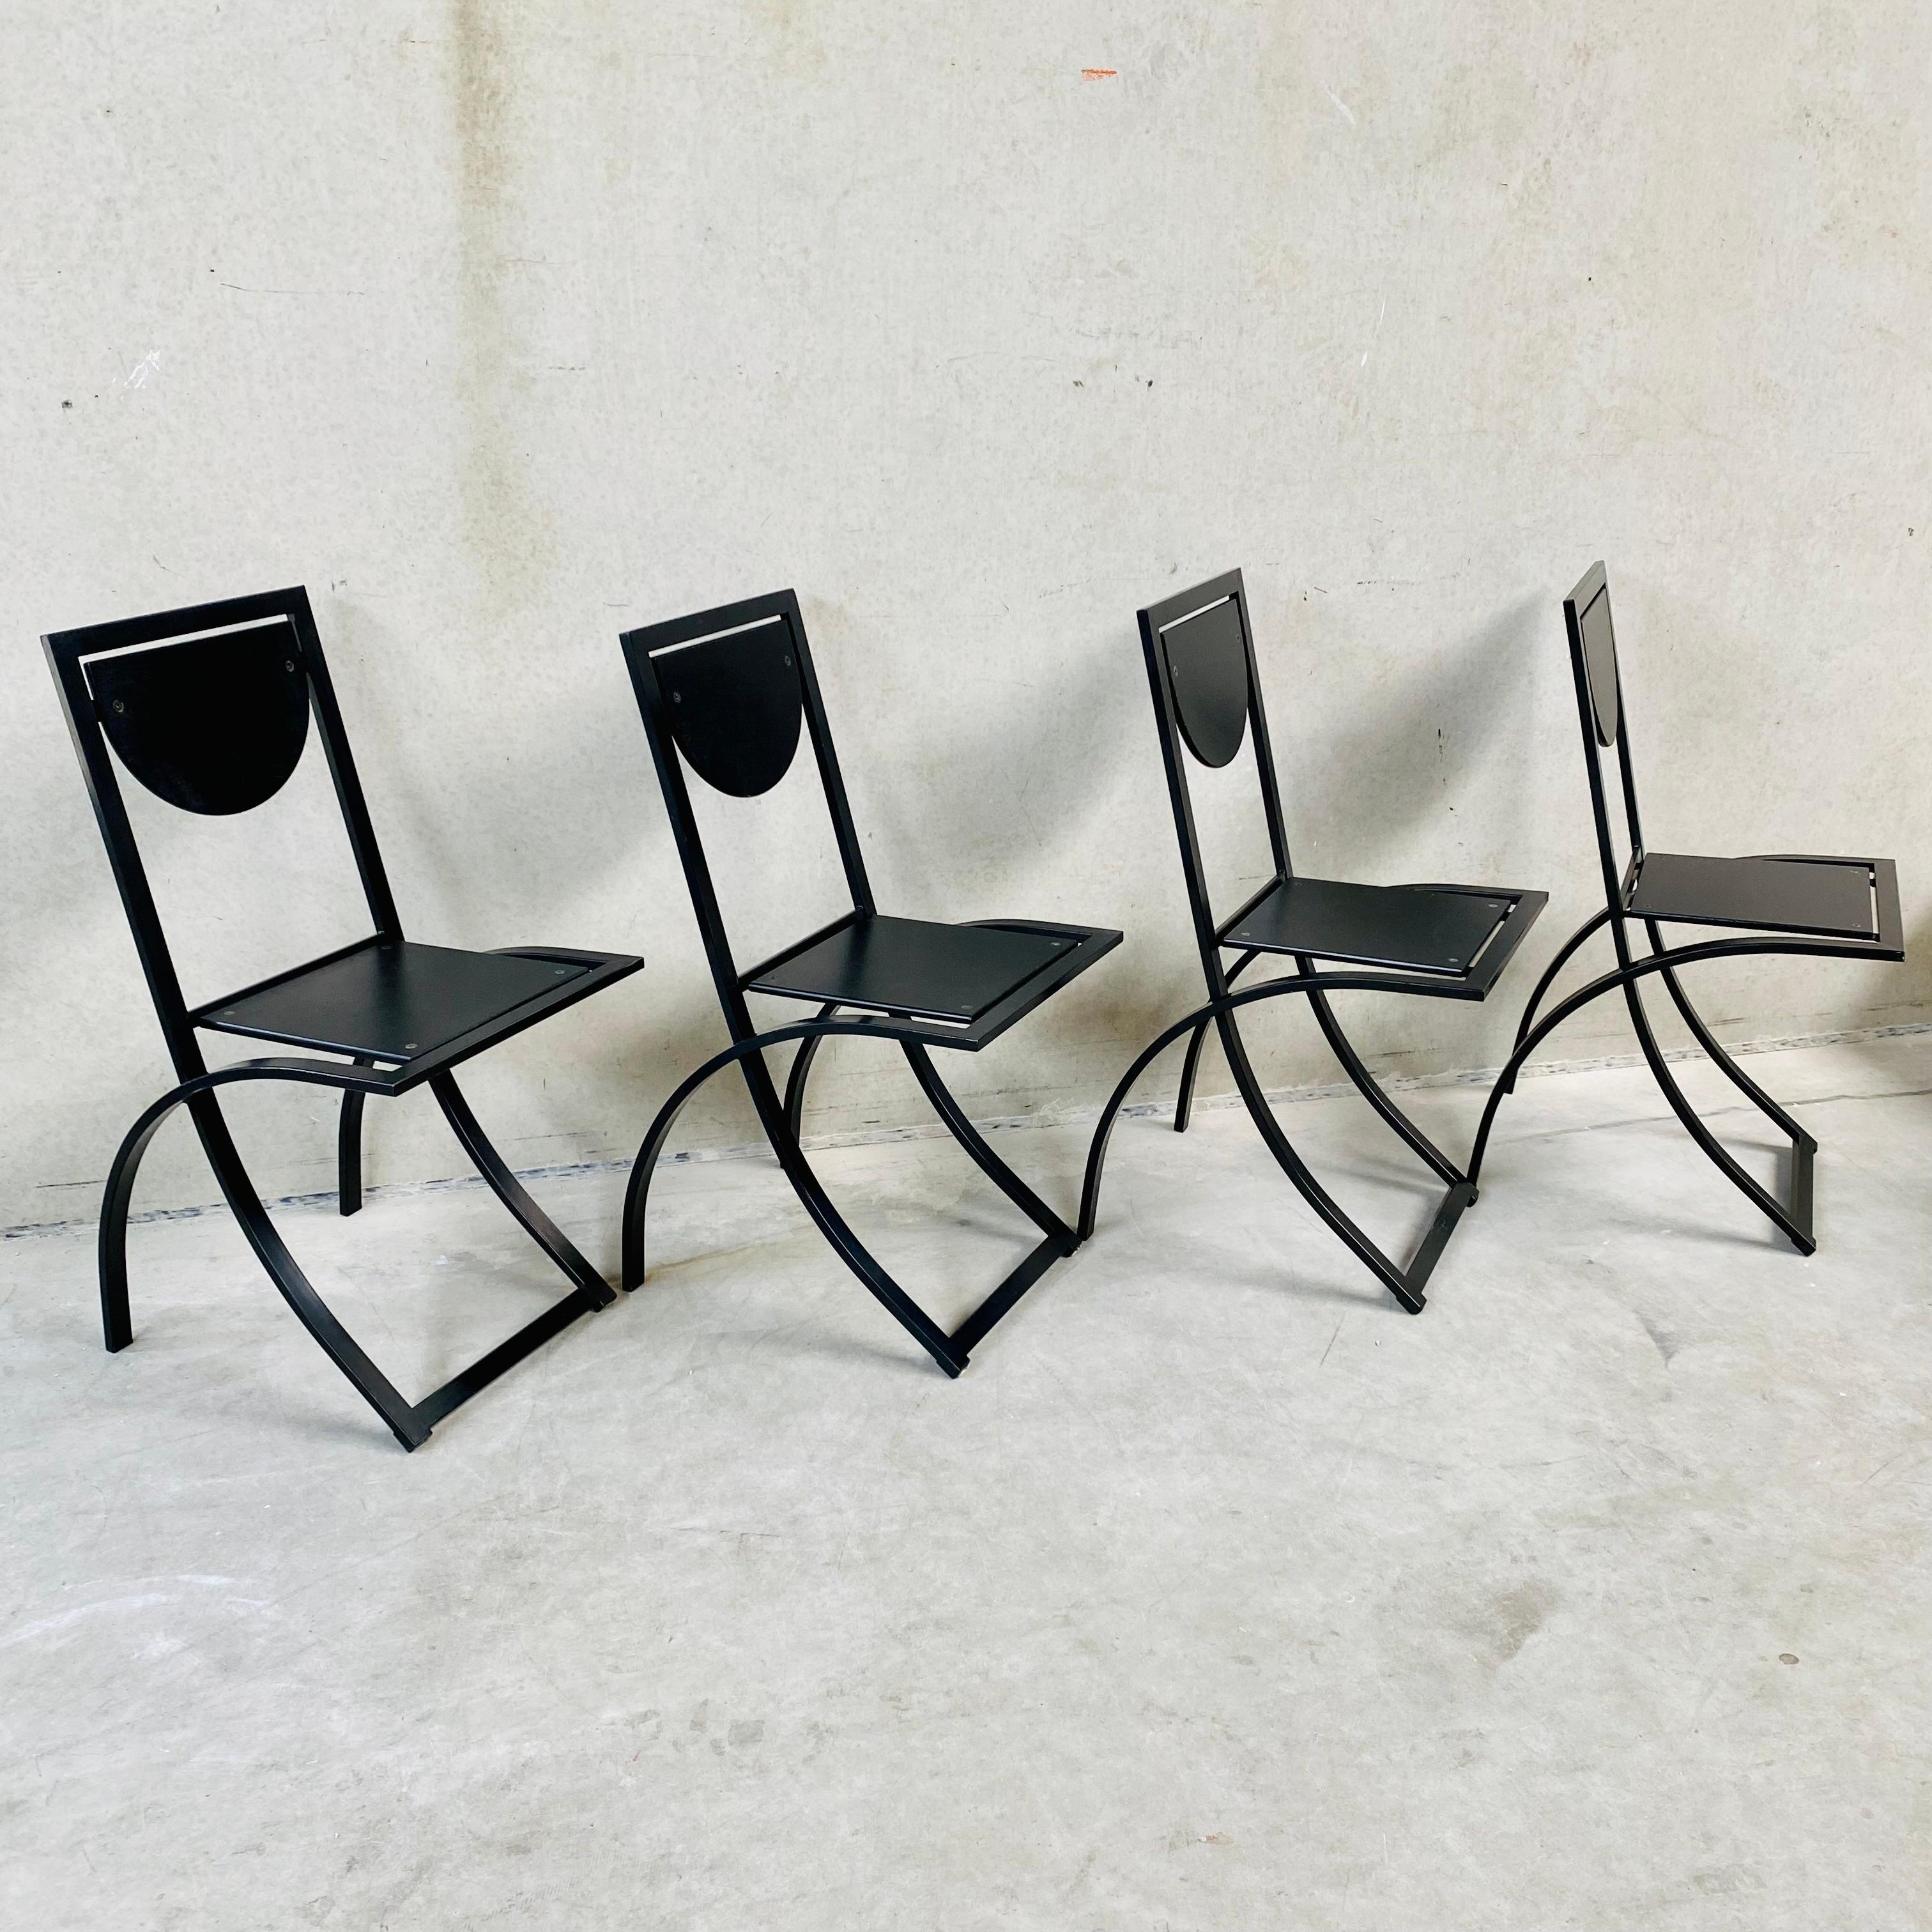 SET OF 4 BLACK SMOKED OAK 'SINUS' DINING CHAIRS BY KARL-FRIEDRICH FÖRSTER FOR KFF, GERMANY 1984

Looking for a timeless addition to your dining space? Look no further than this set of 4 black smoked oak 'Sinus' dining chairs by Karl-Friedrich